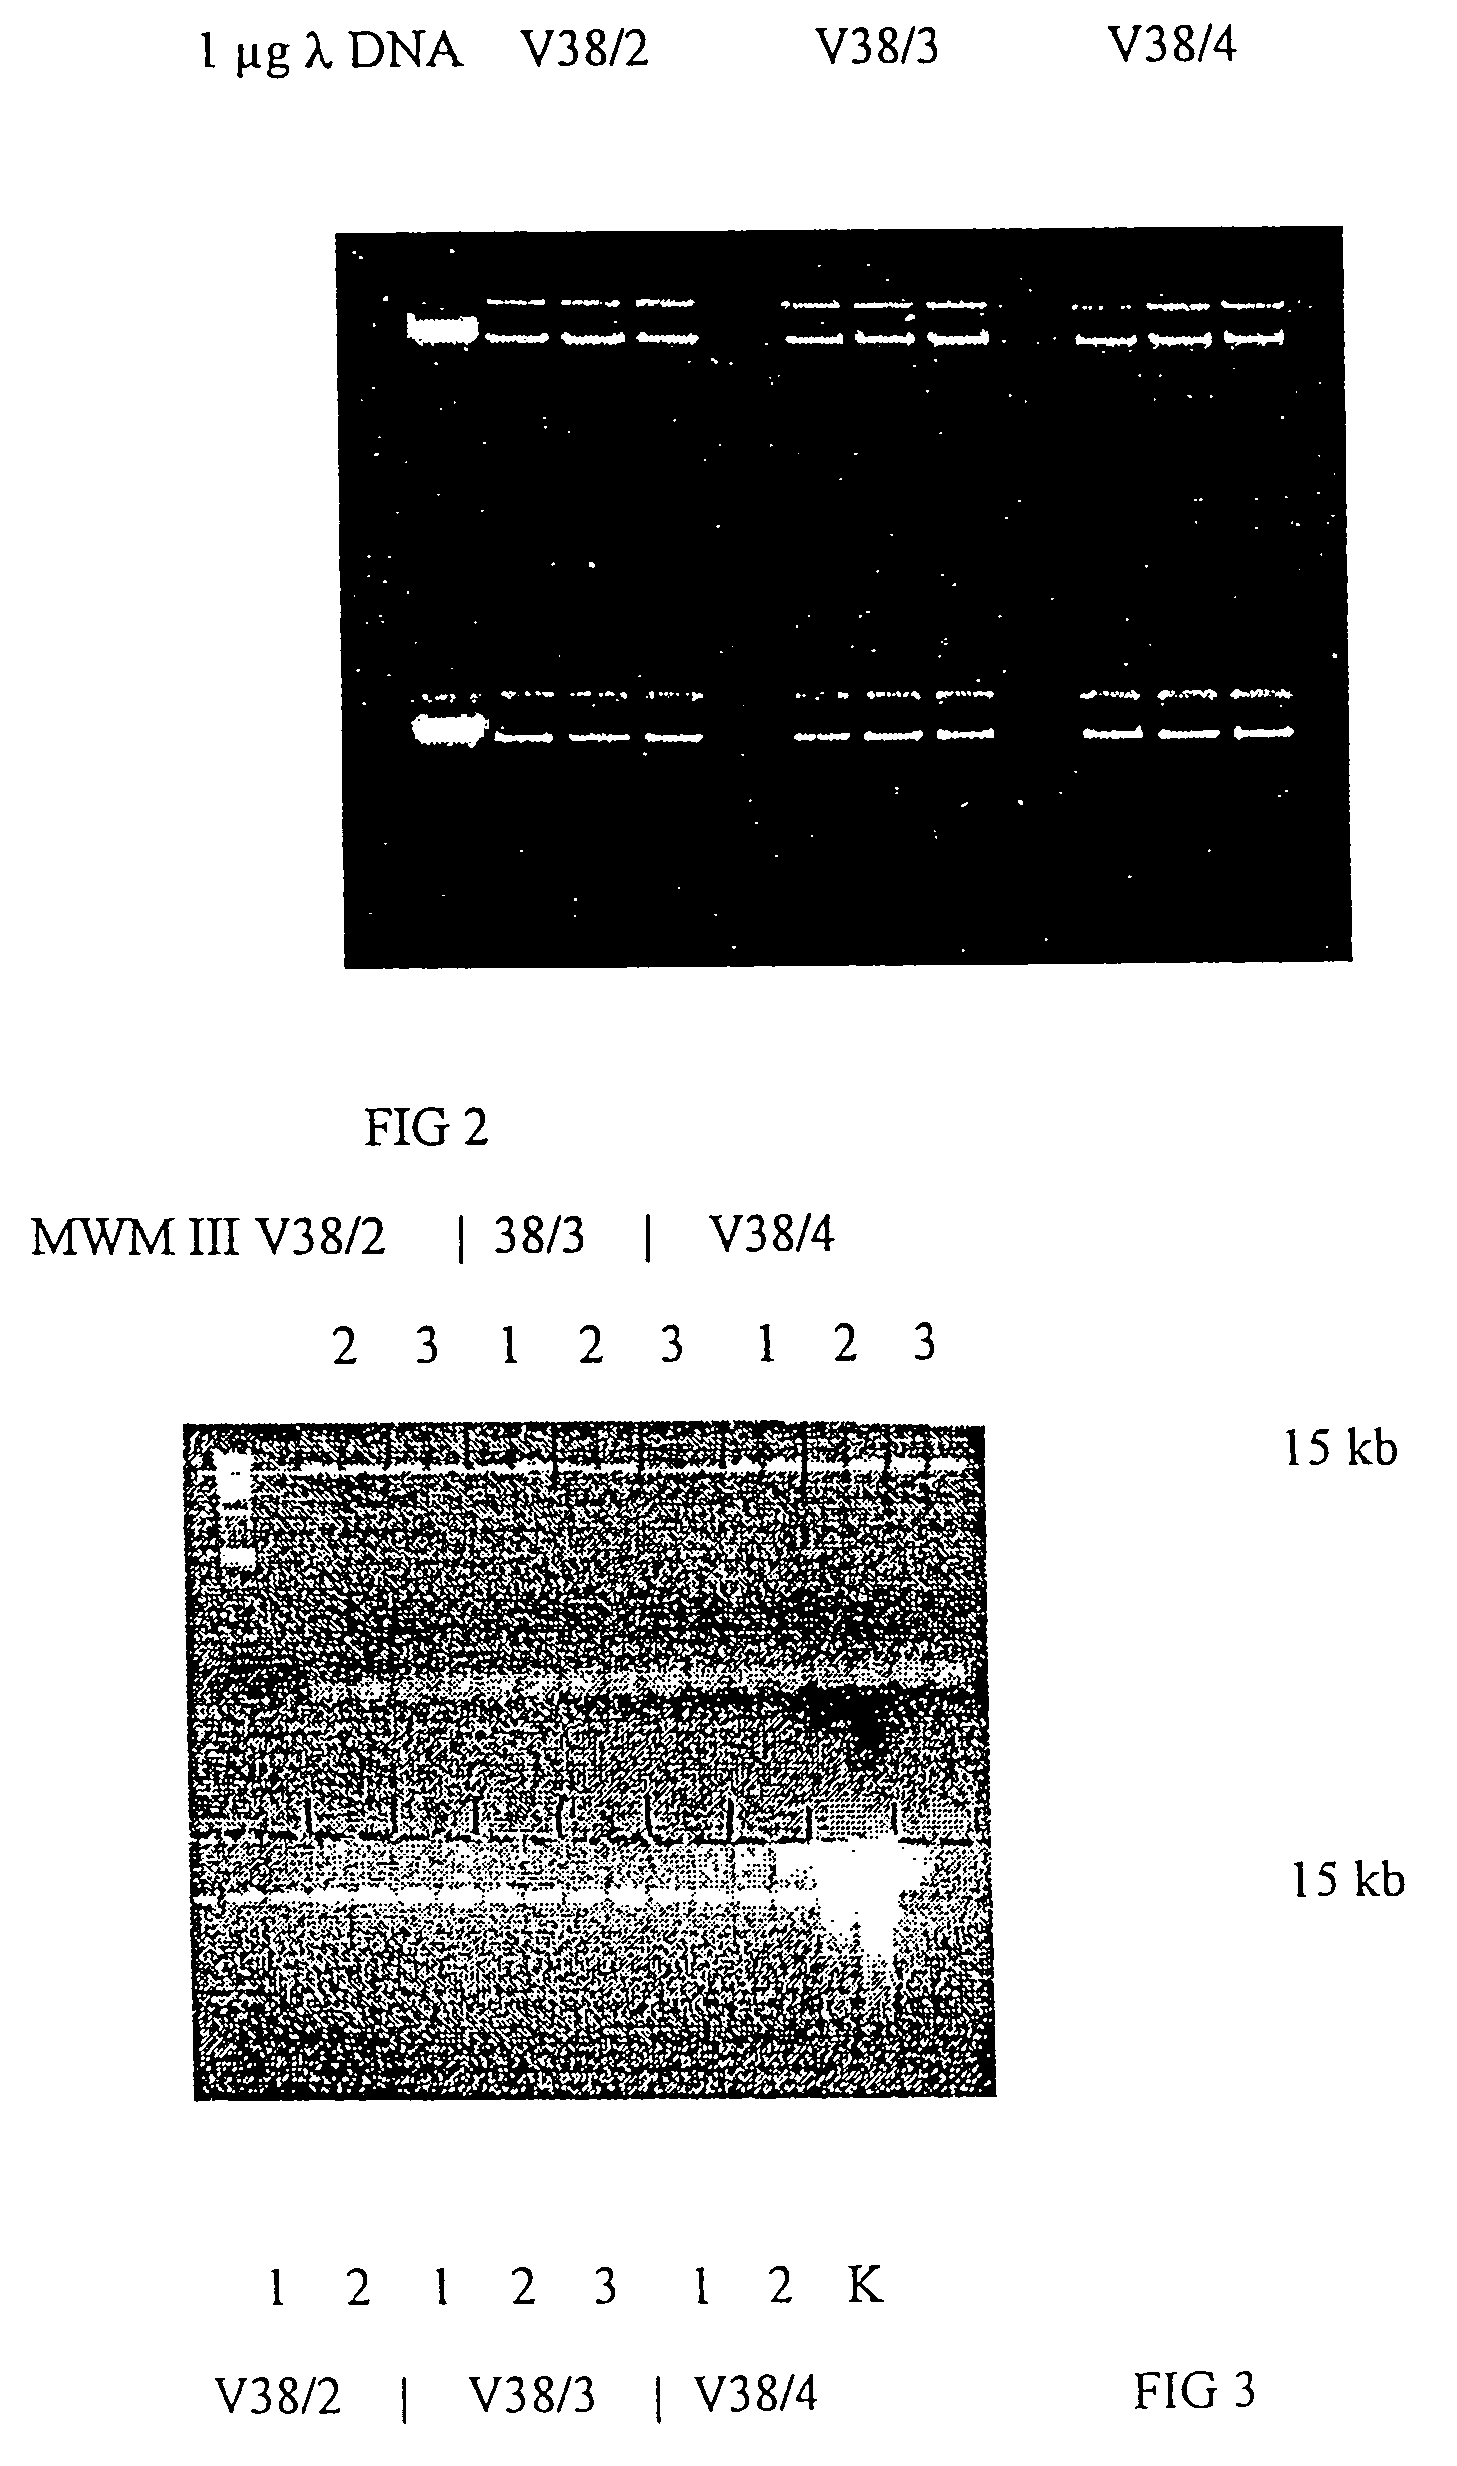 Method for separating biological material from a fluid using magnetic particles